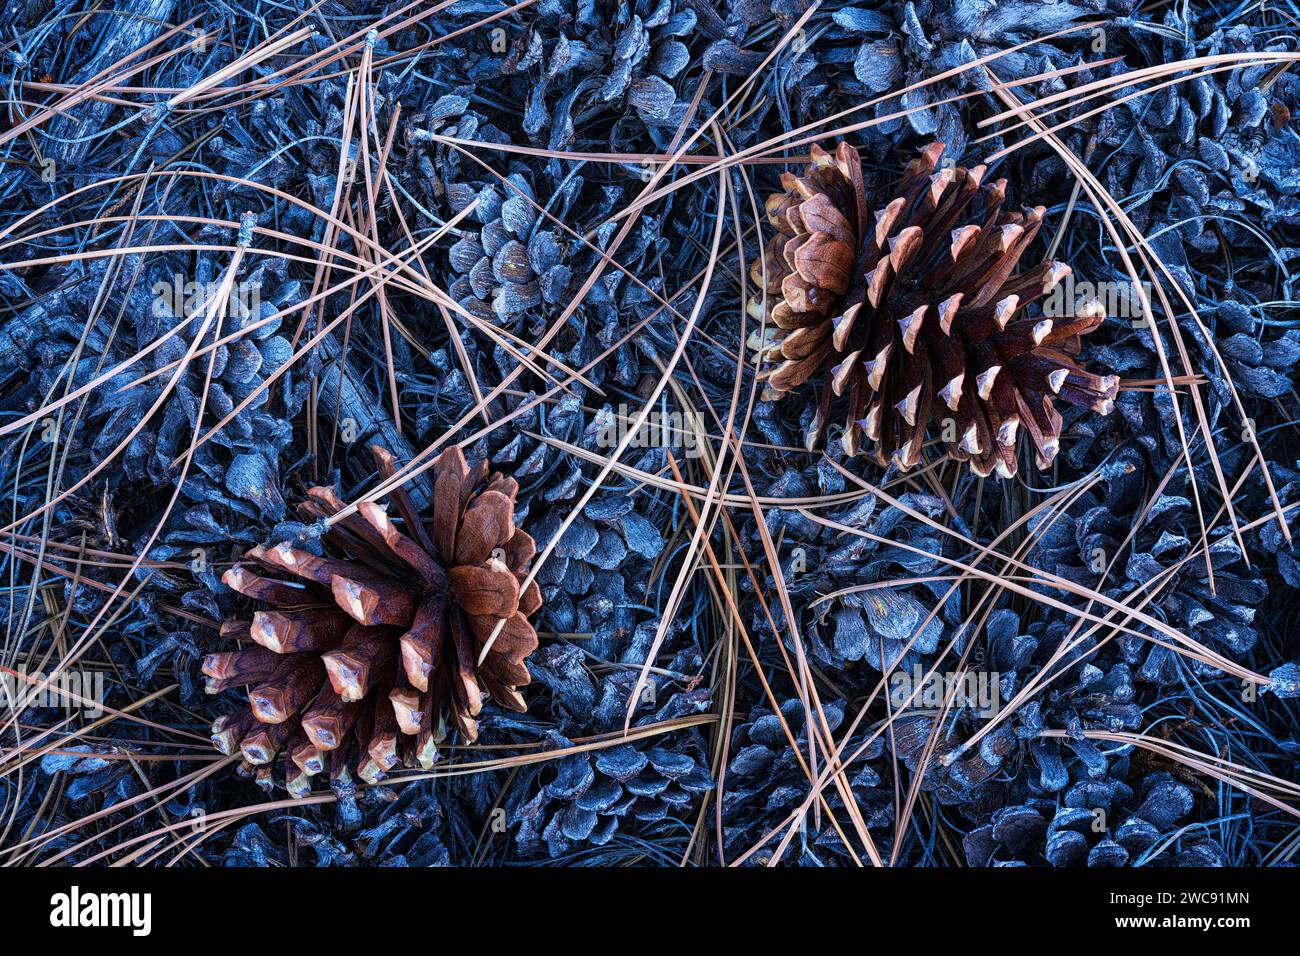 Pine cones and needles underneath a Ponderosa pine in Zion National Park, Utah Stock Photo